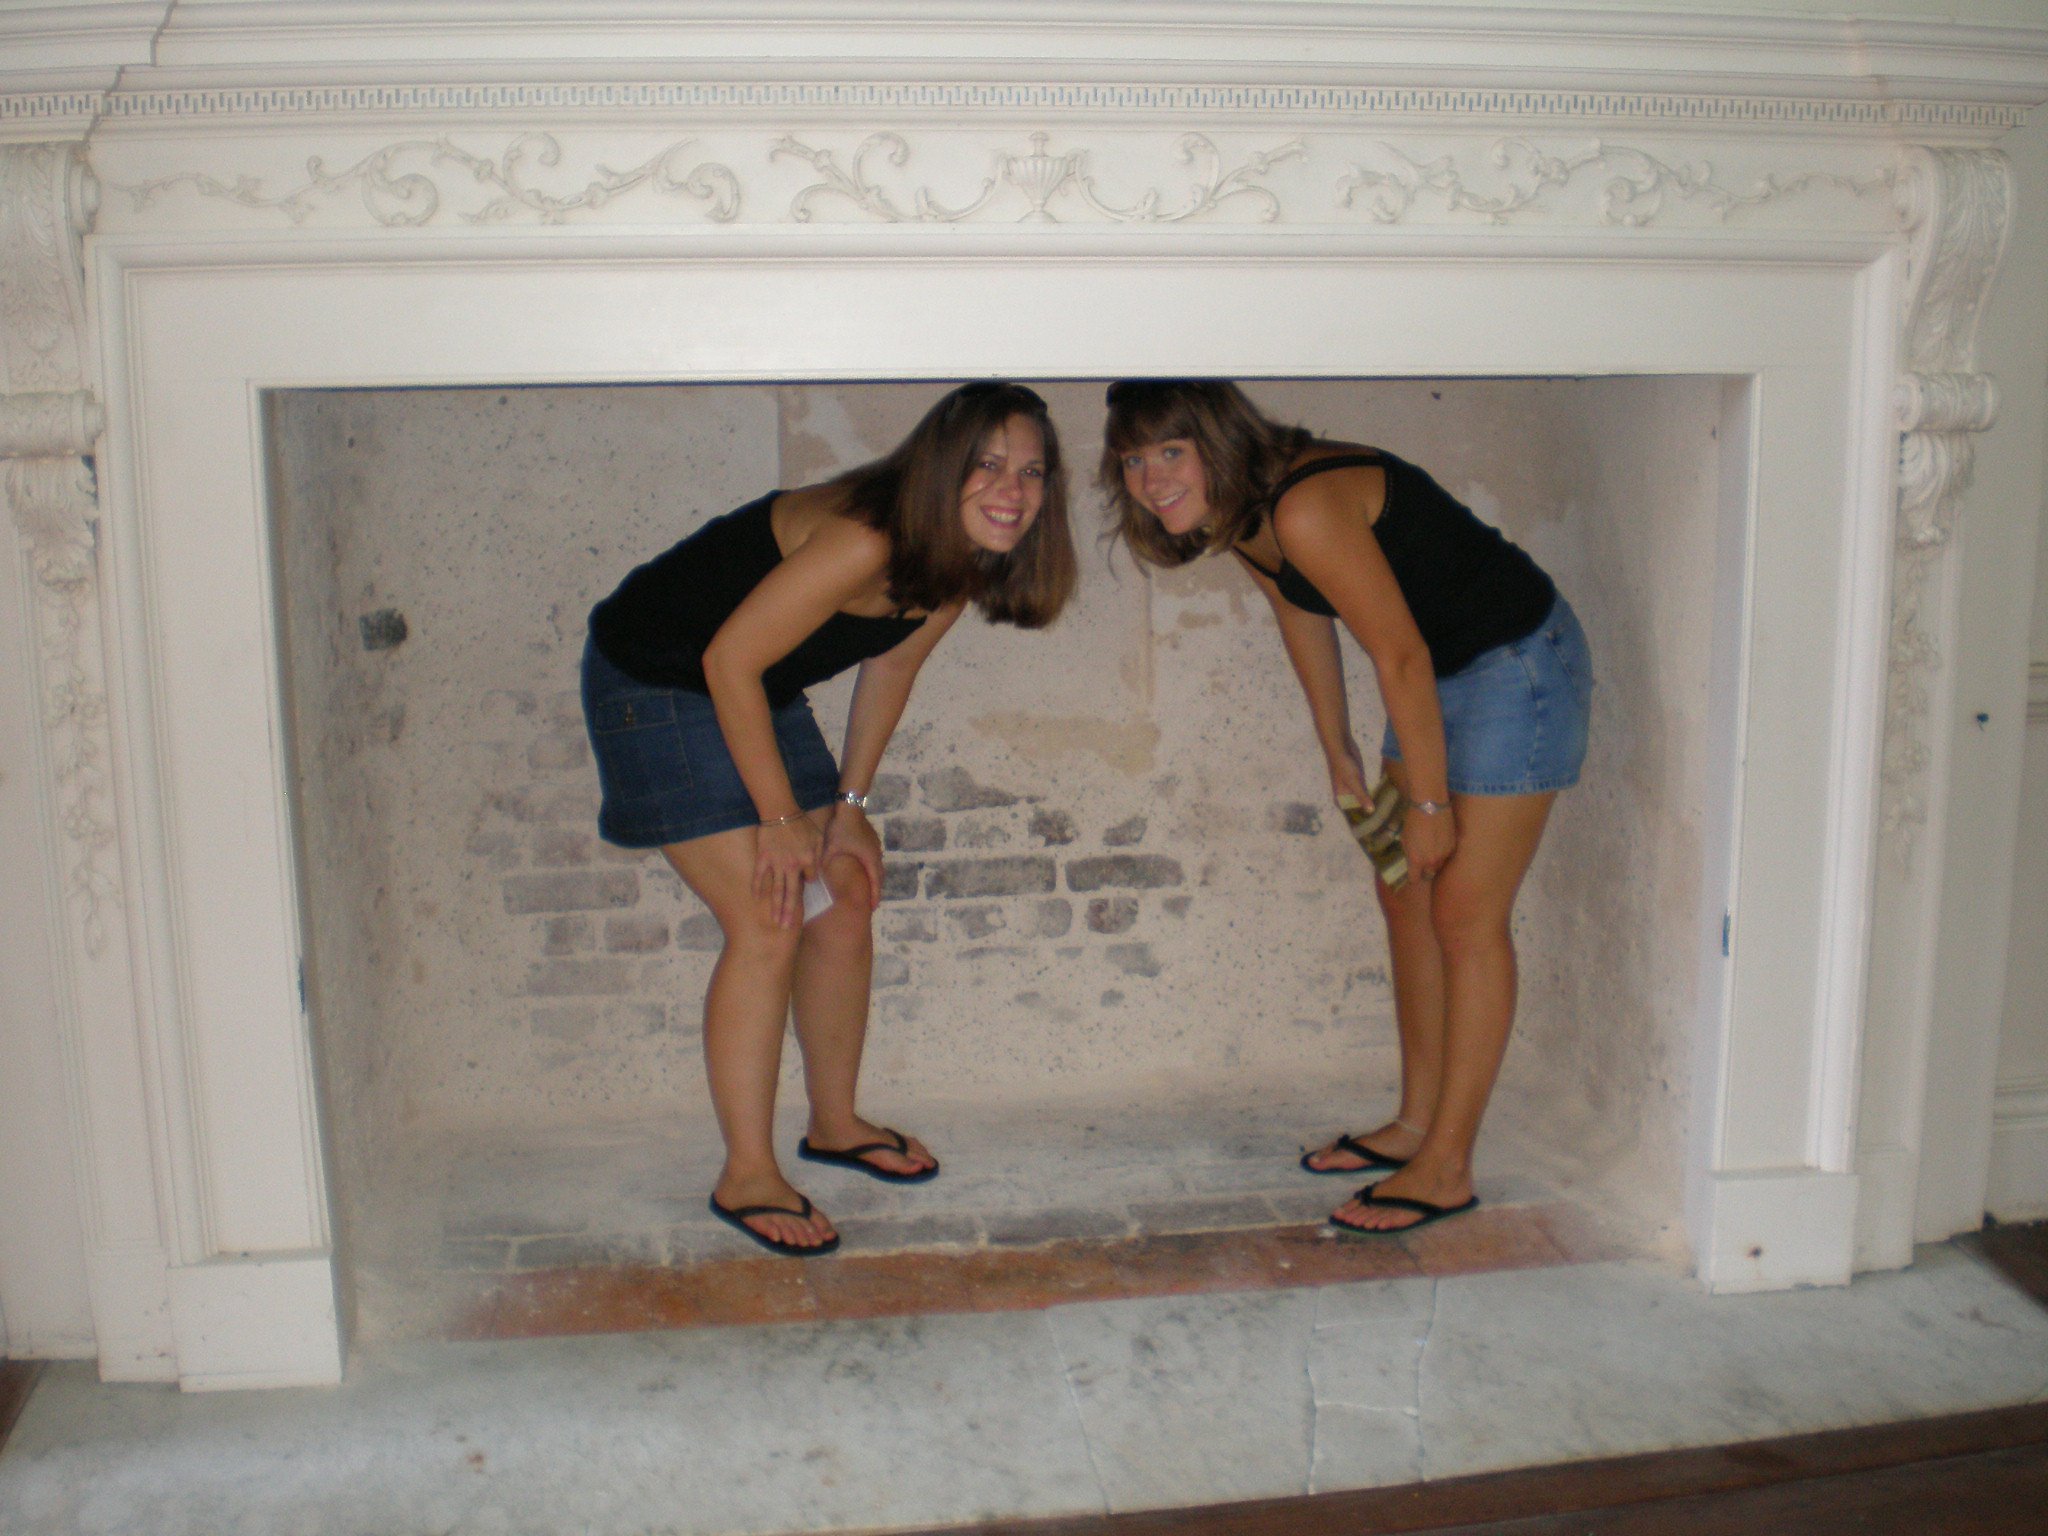 My cousin and sister in the big fireplace